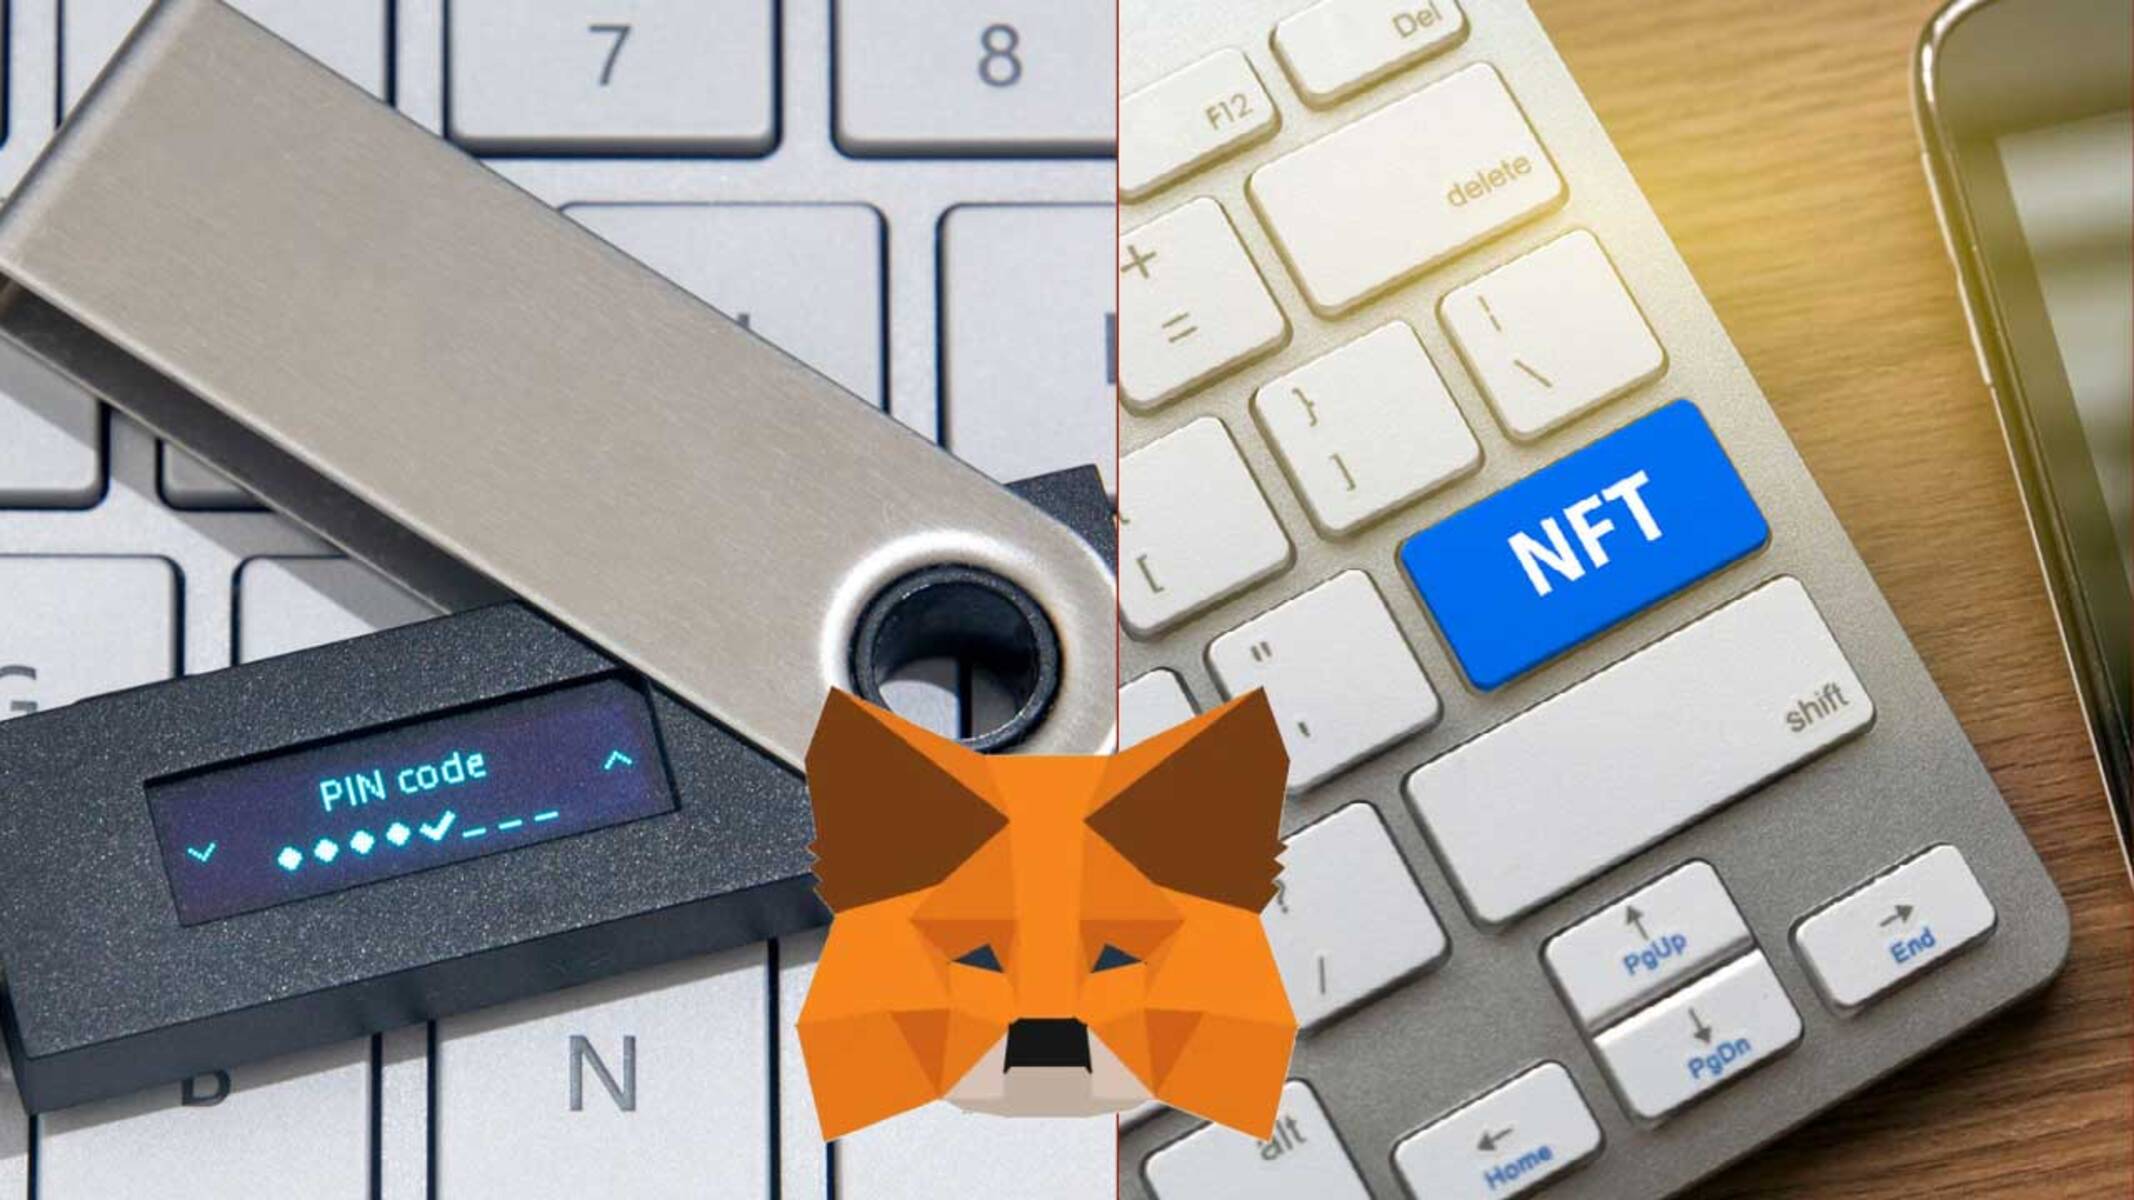 How To Transfer NFT From Ledger To Metamask